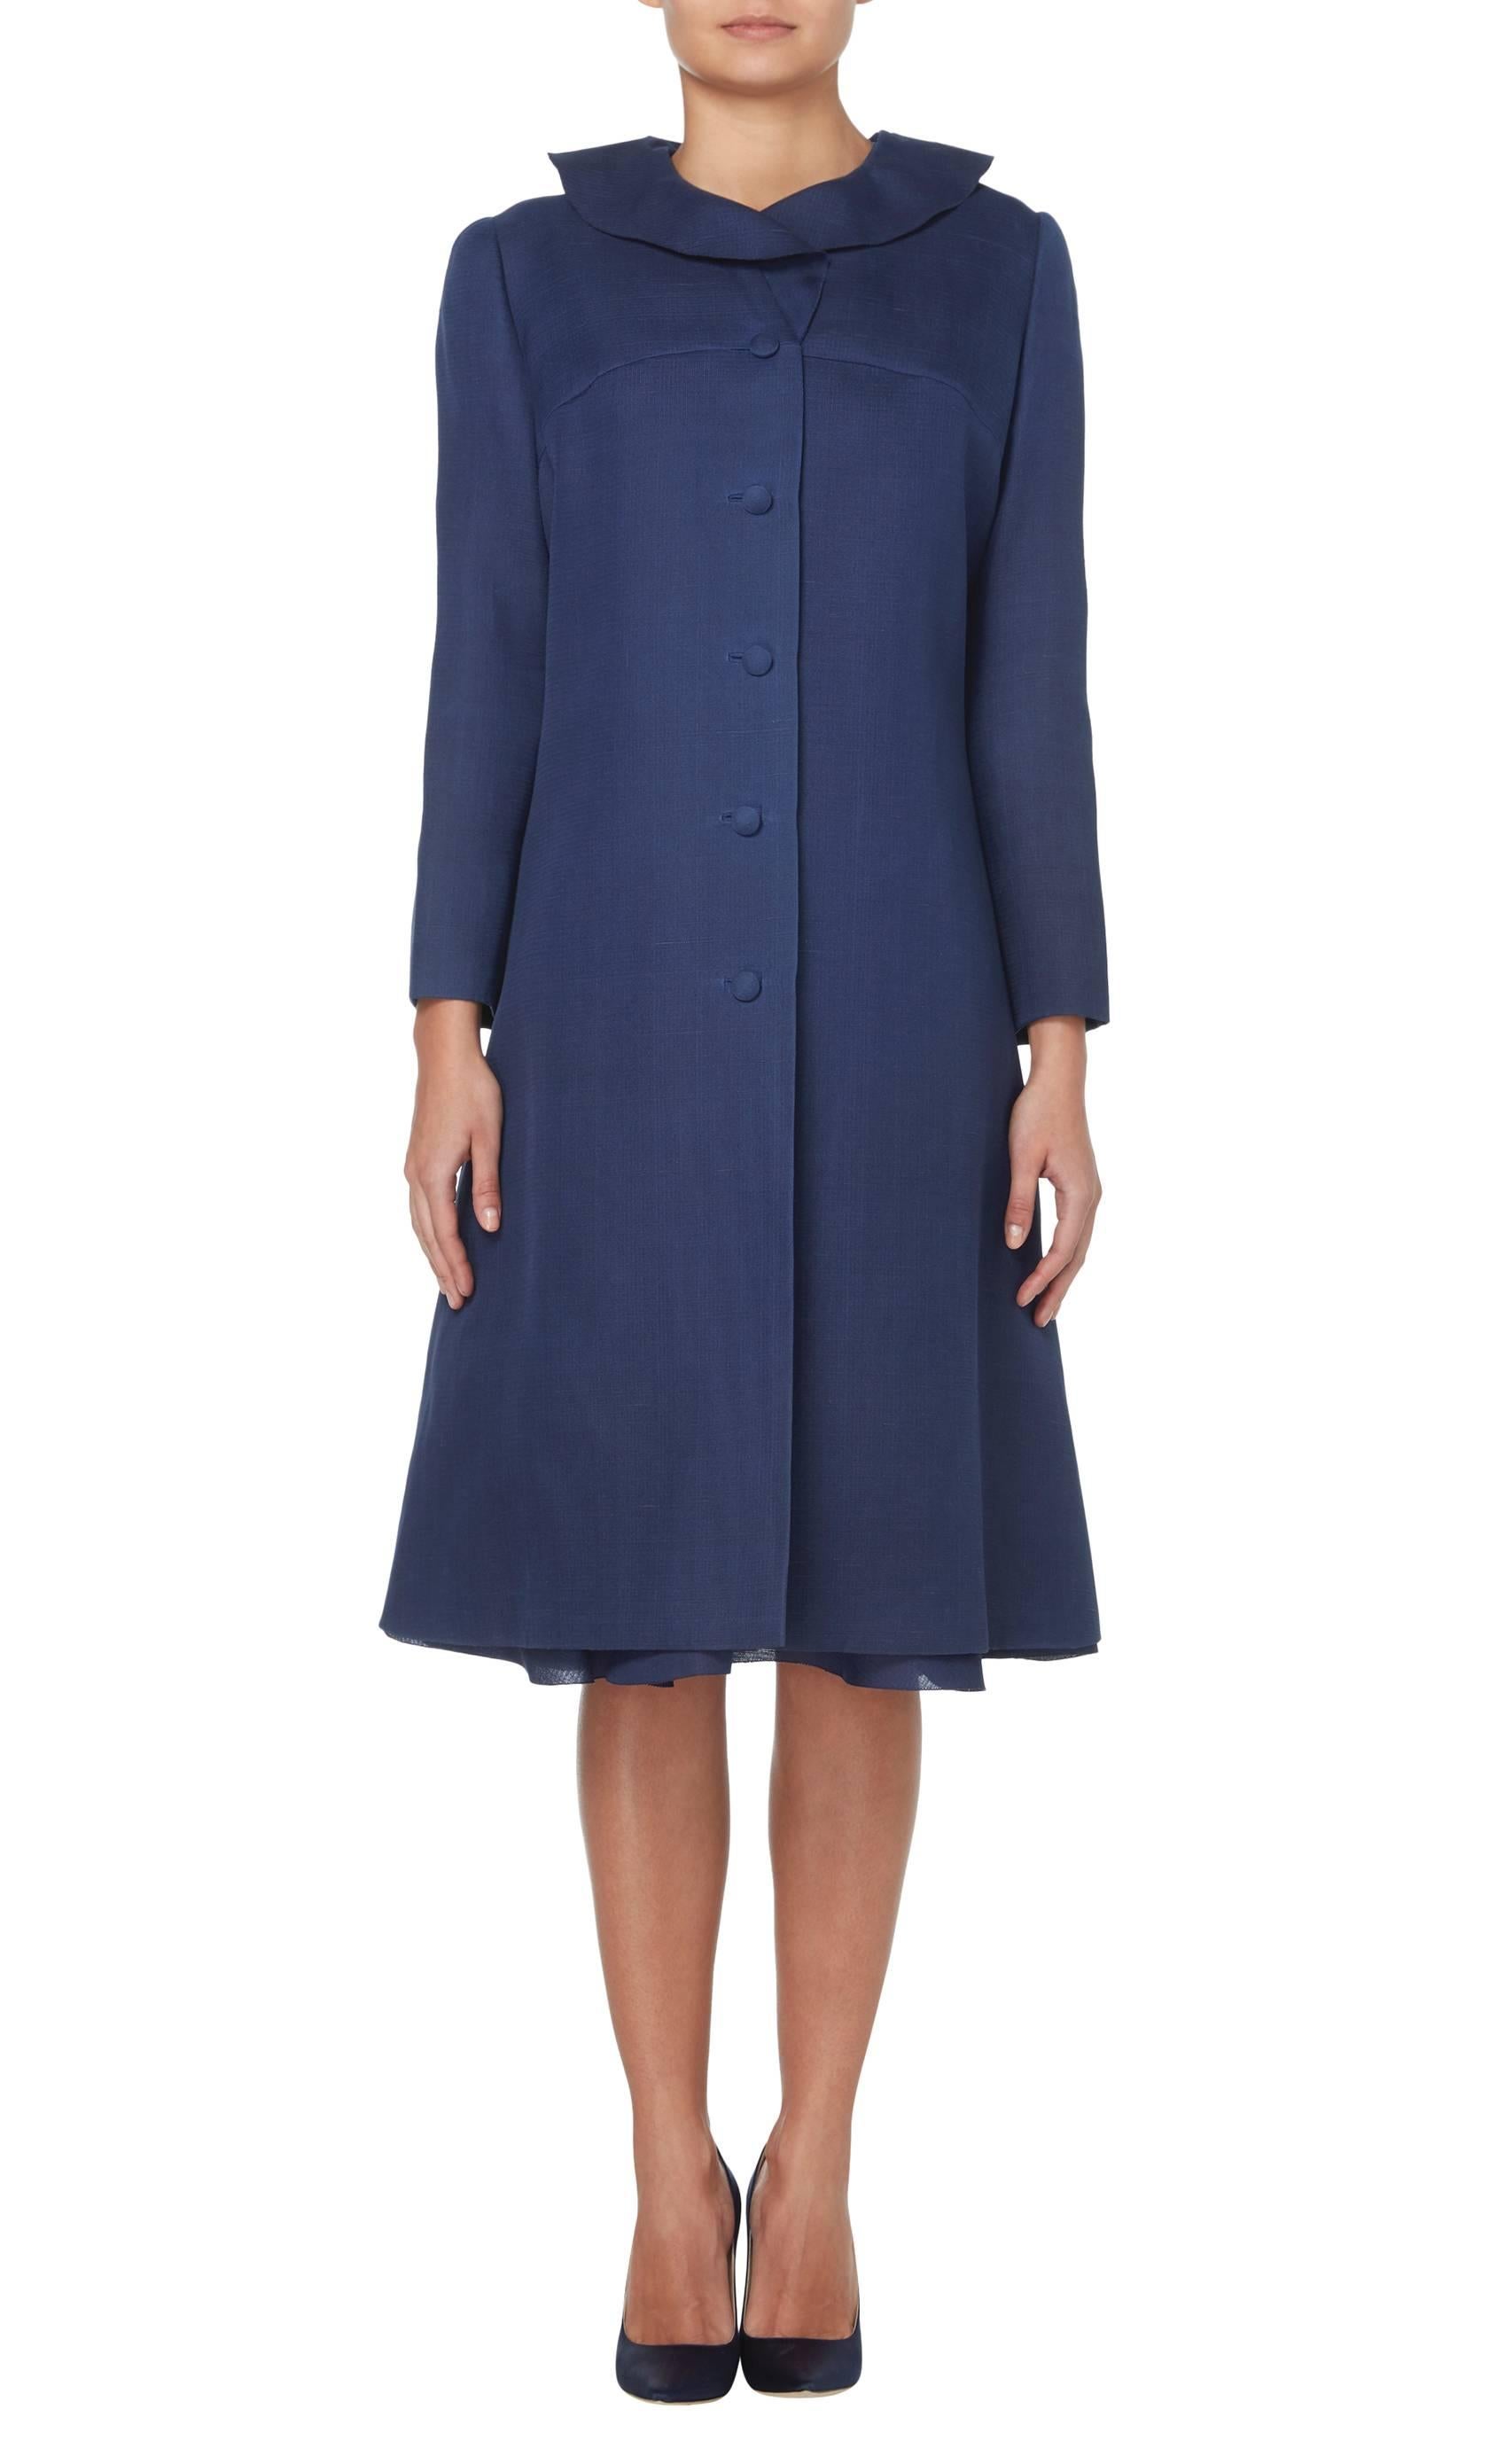 
The perfect piece for the races or summer parties, this Marc Bohan for Dior dress and coat ensemble is a fantastic piece of summer tailoring. Constructed in navy blue gazaar, the short sleeved dress features a feminine fluted skirt, while the coat